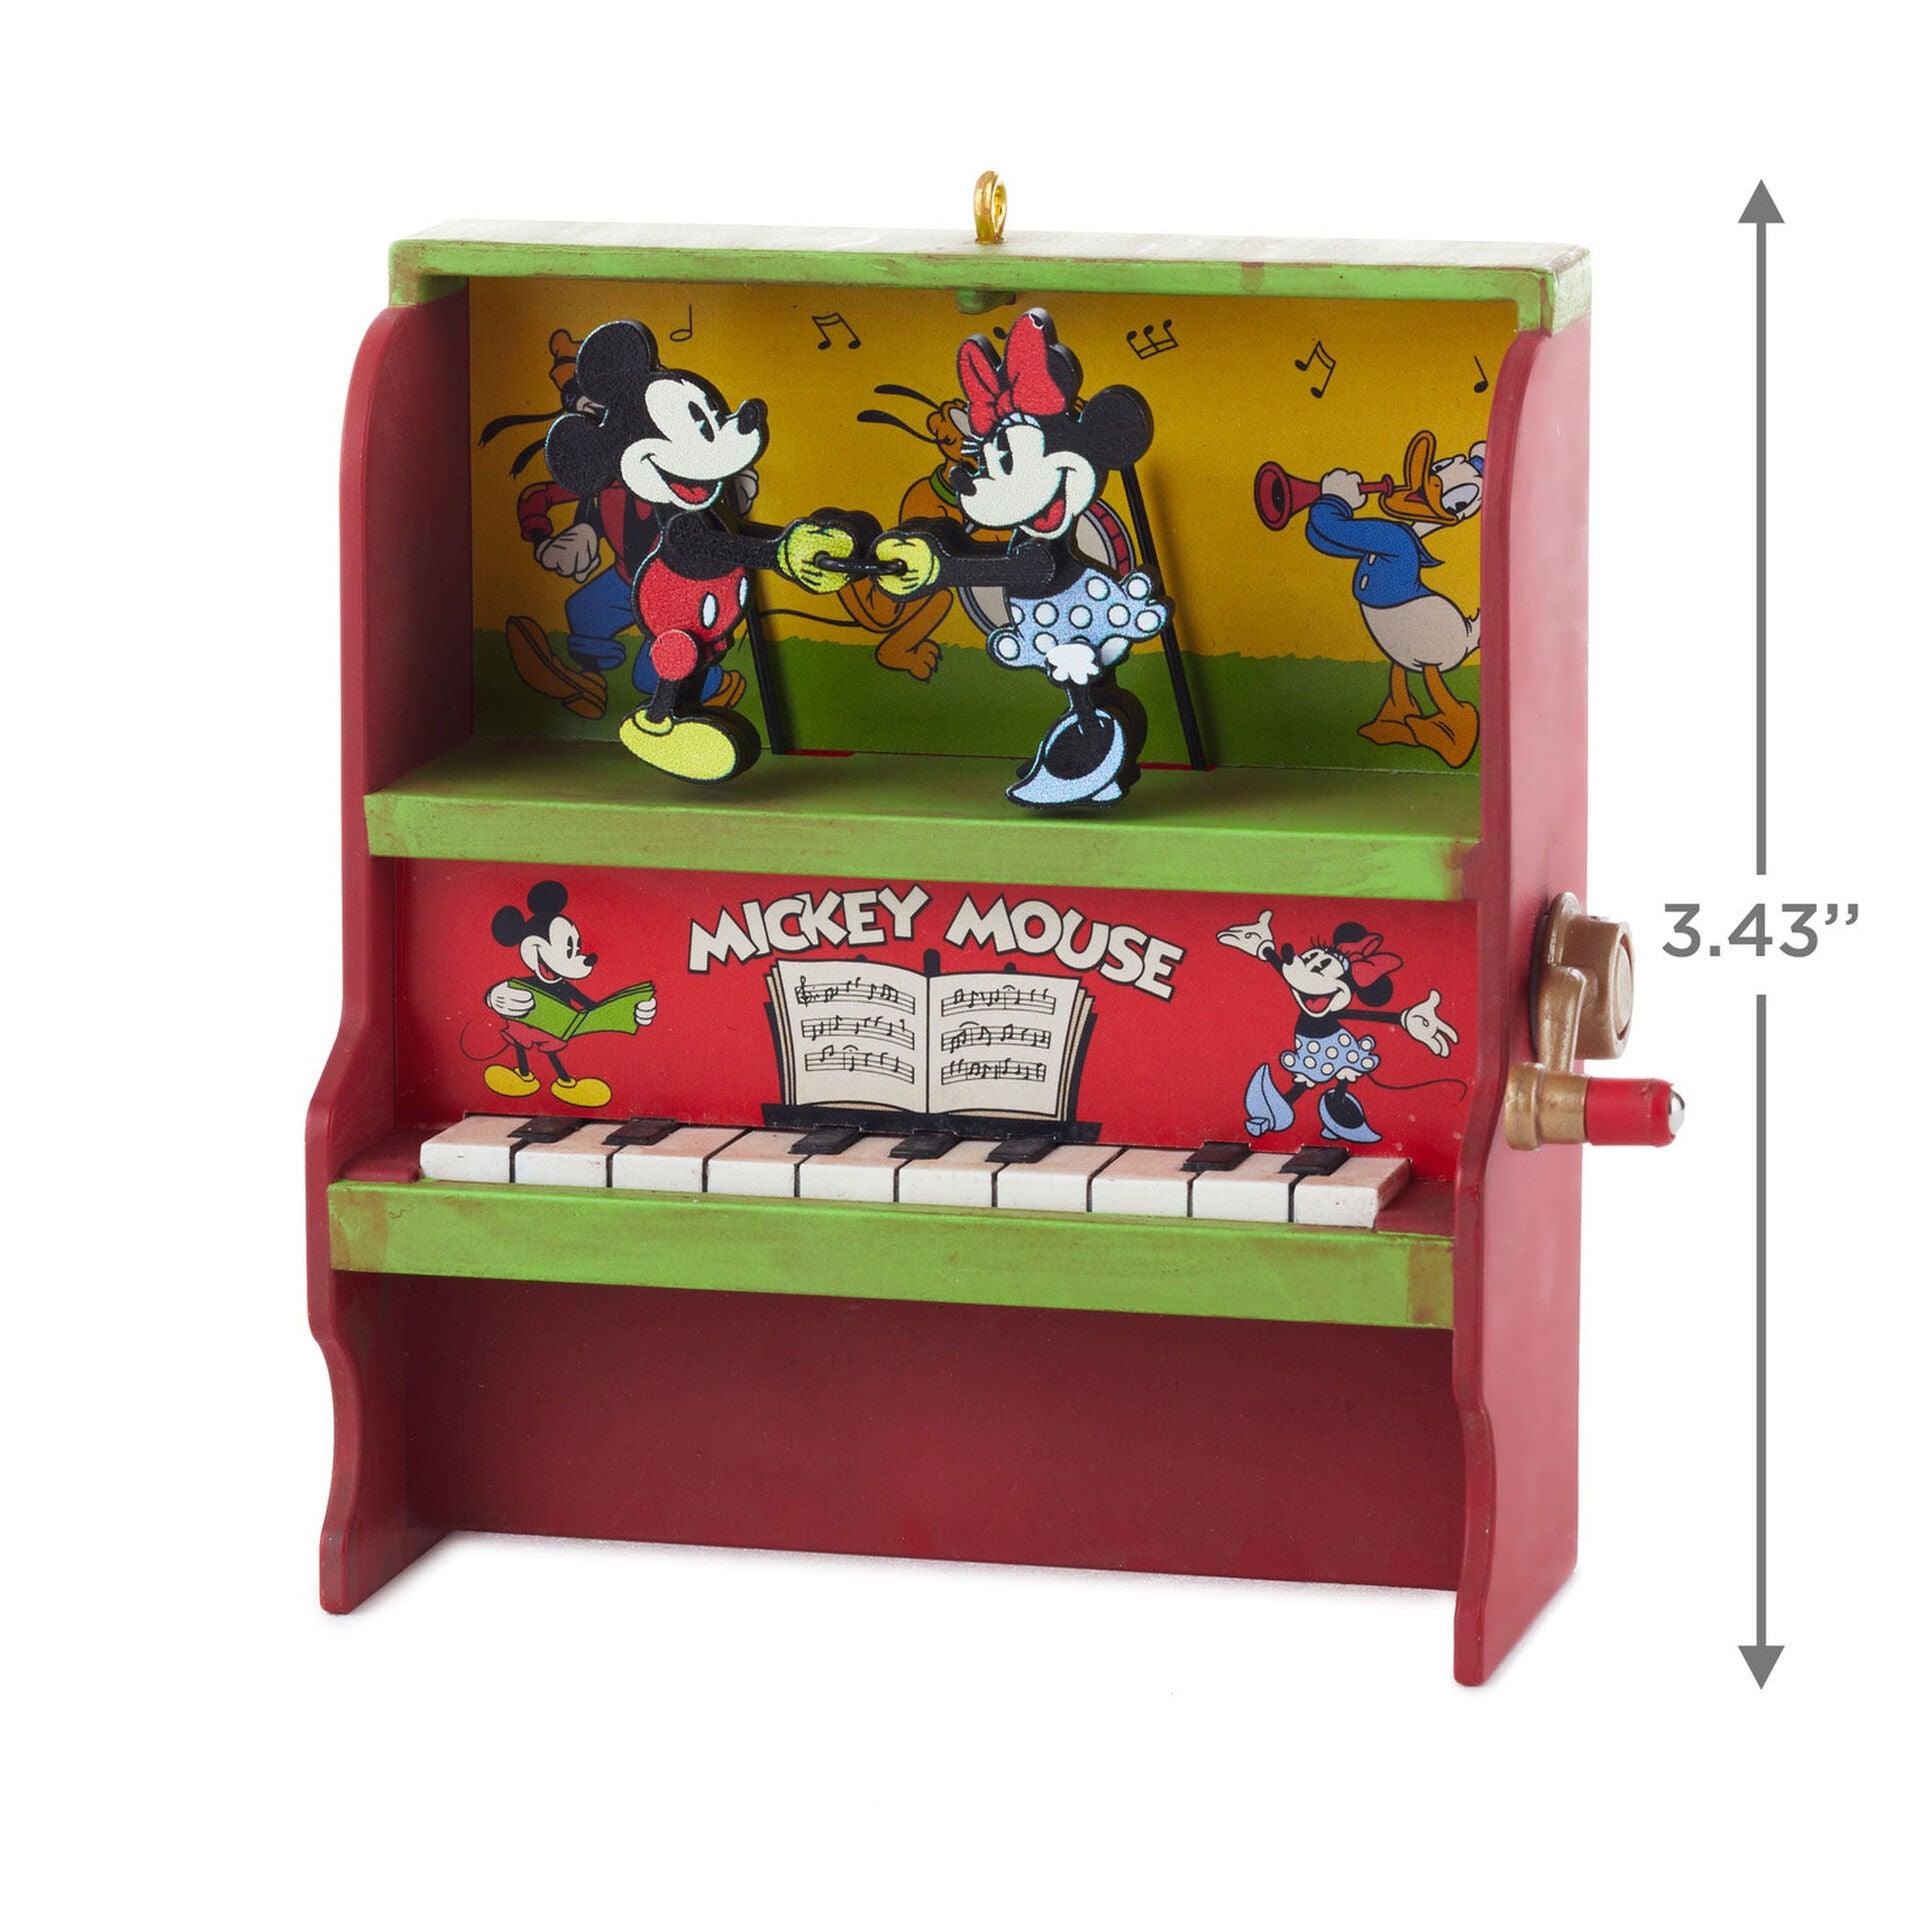 Disney Mickey and Minnie Let's Dance! Musical Ornament With Motion